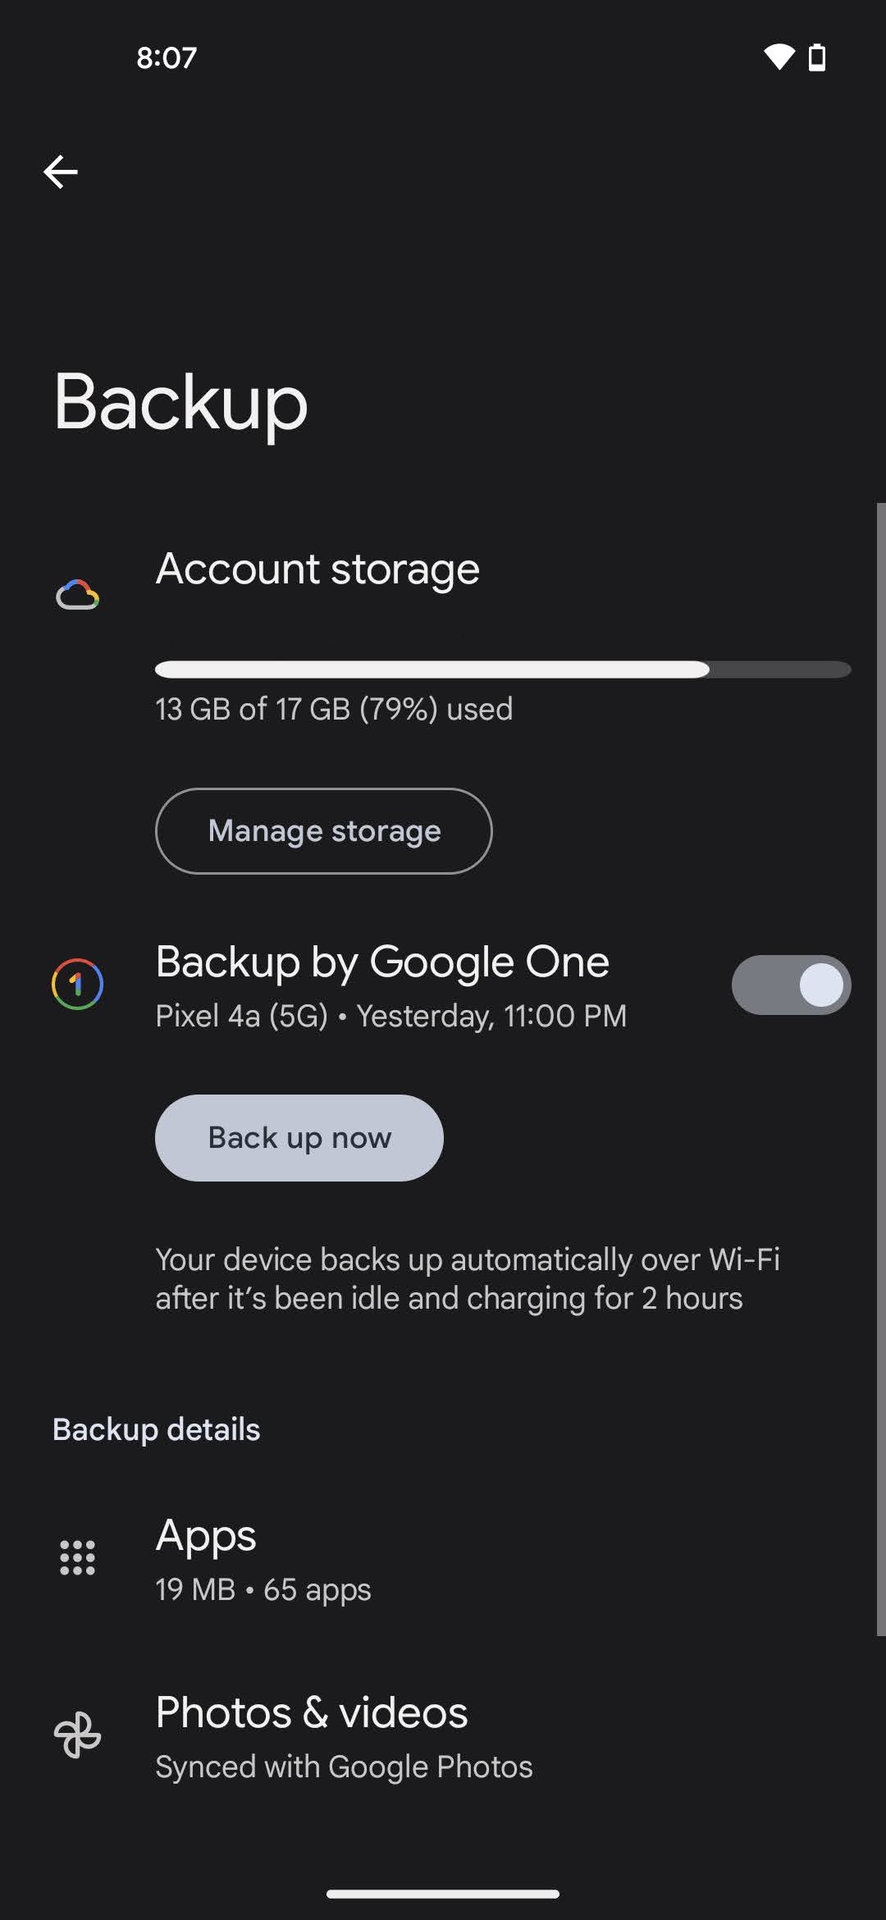 How to turn on Backup by Google One 3